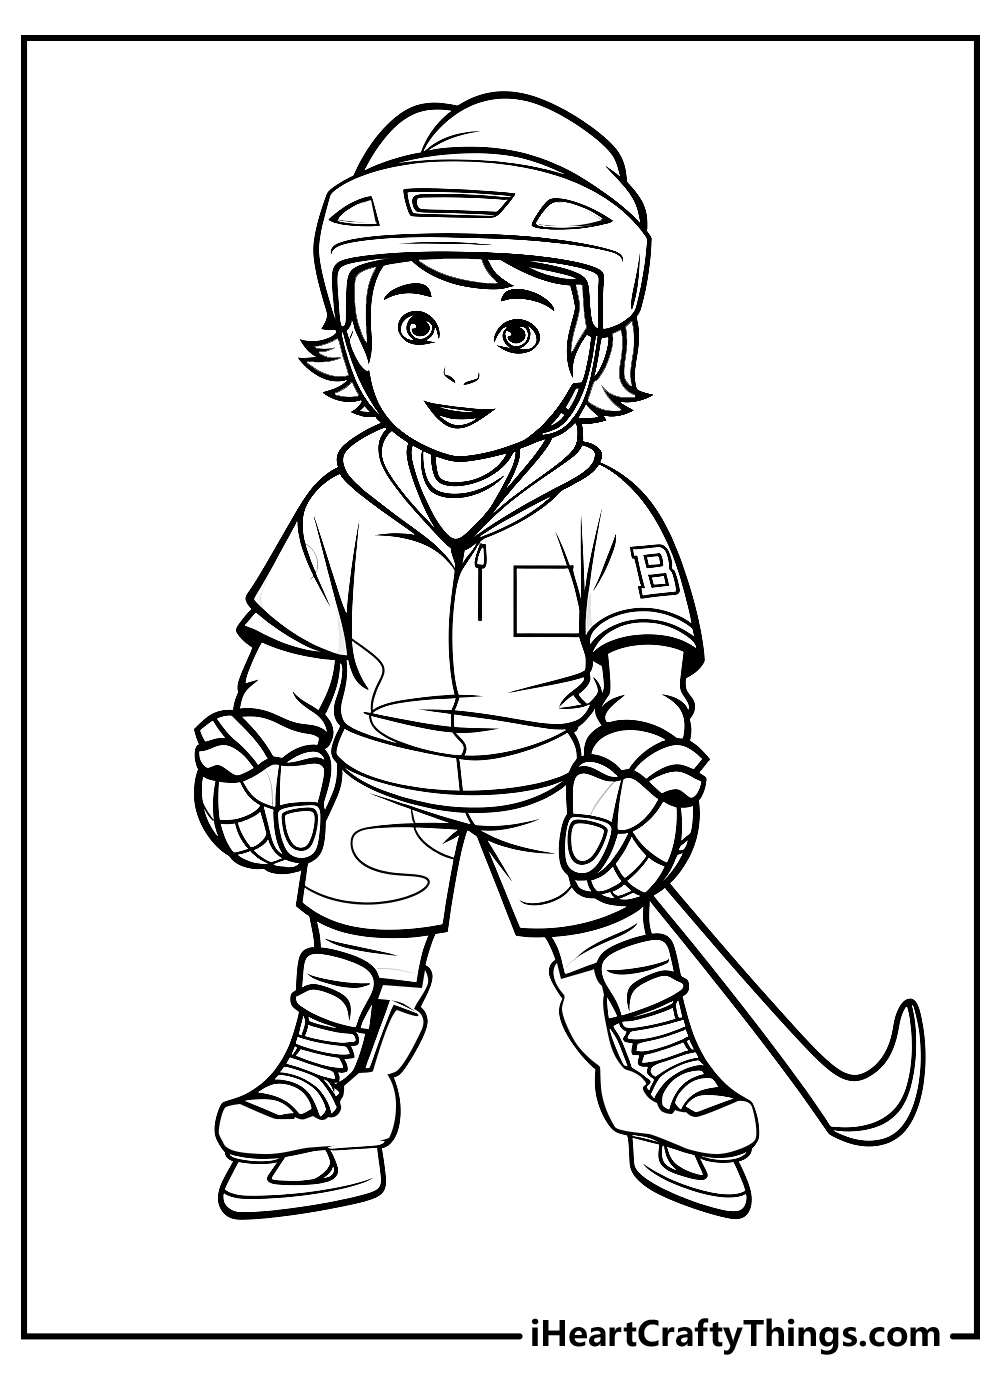 hockey coloring pages free download